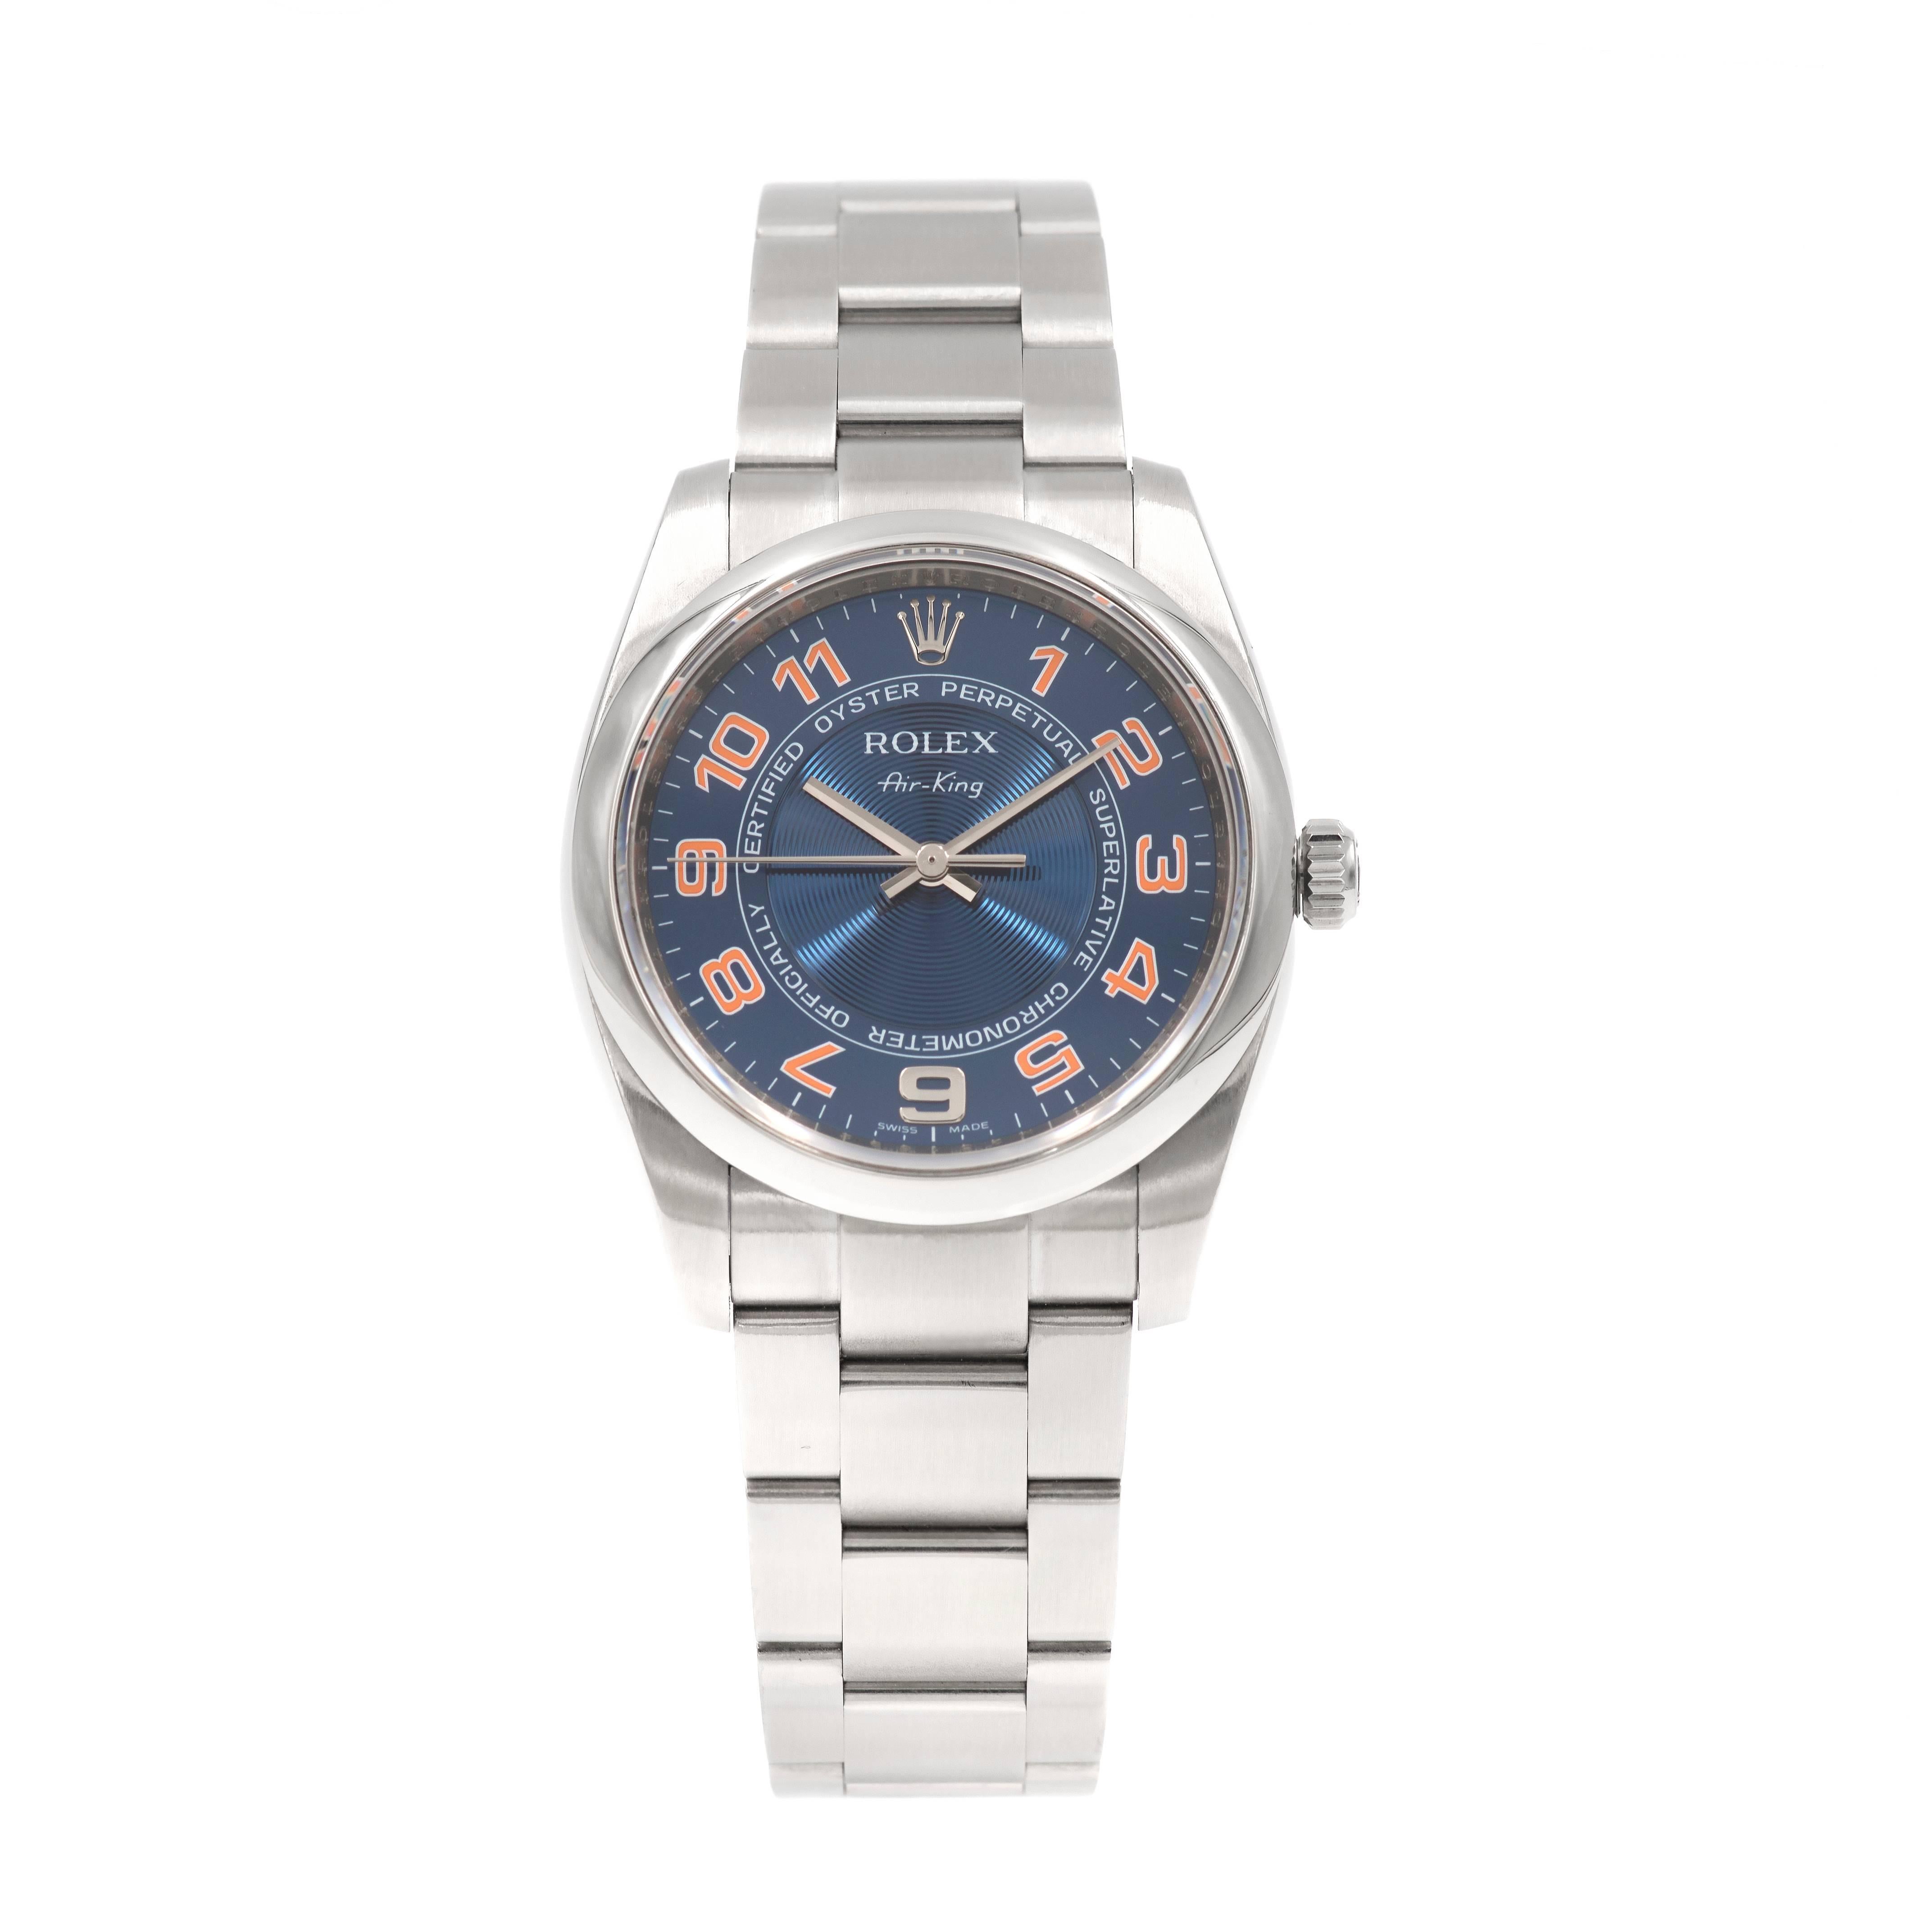 Rolex stainless steel Air King model 114200 with plain bezel and factory original blue dial with orange numbers and Oyster band. Circa 2008.

Stainless steel
Serial# M231692 – Style – 114200
111.8 grams
Band length: 8 1/8 inches – can be shortened